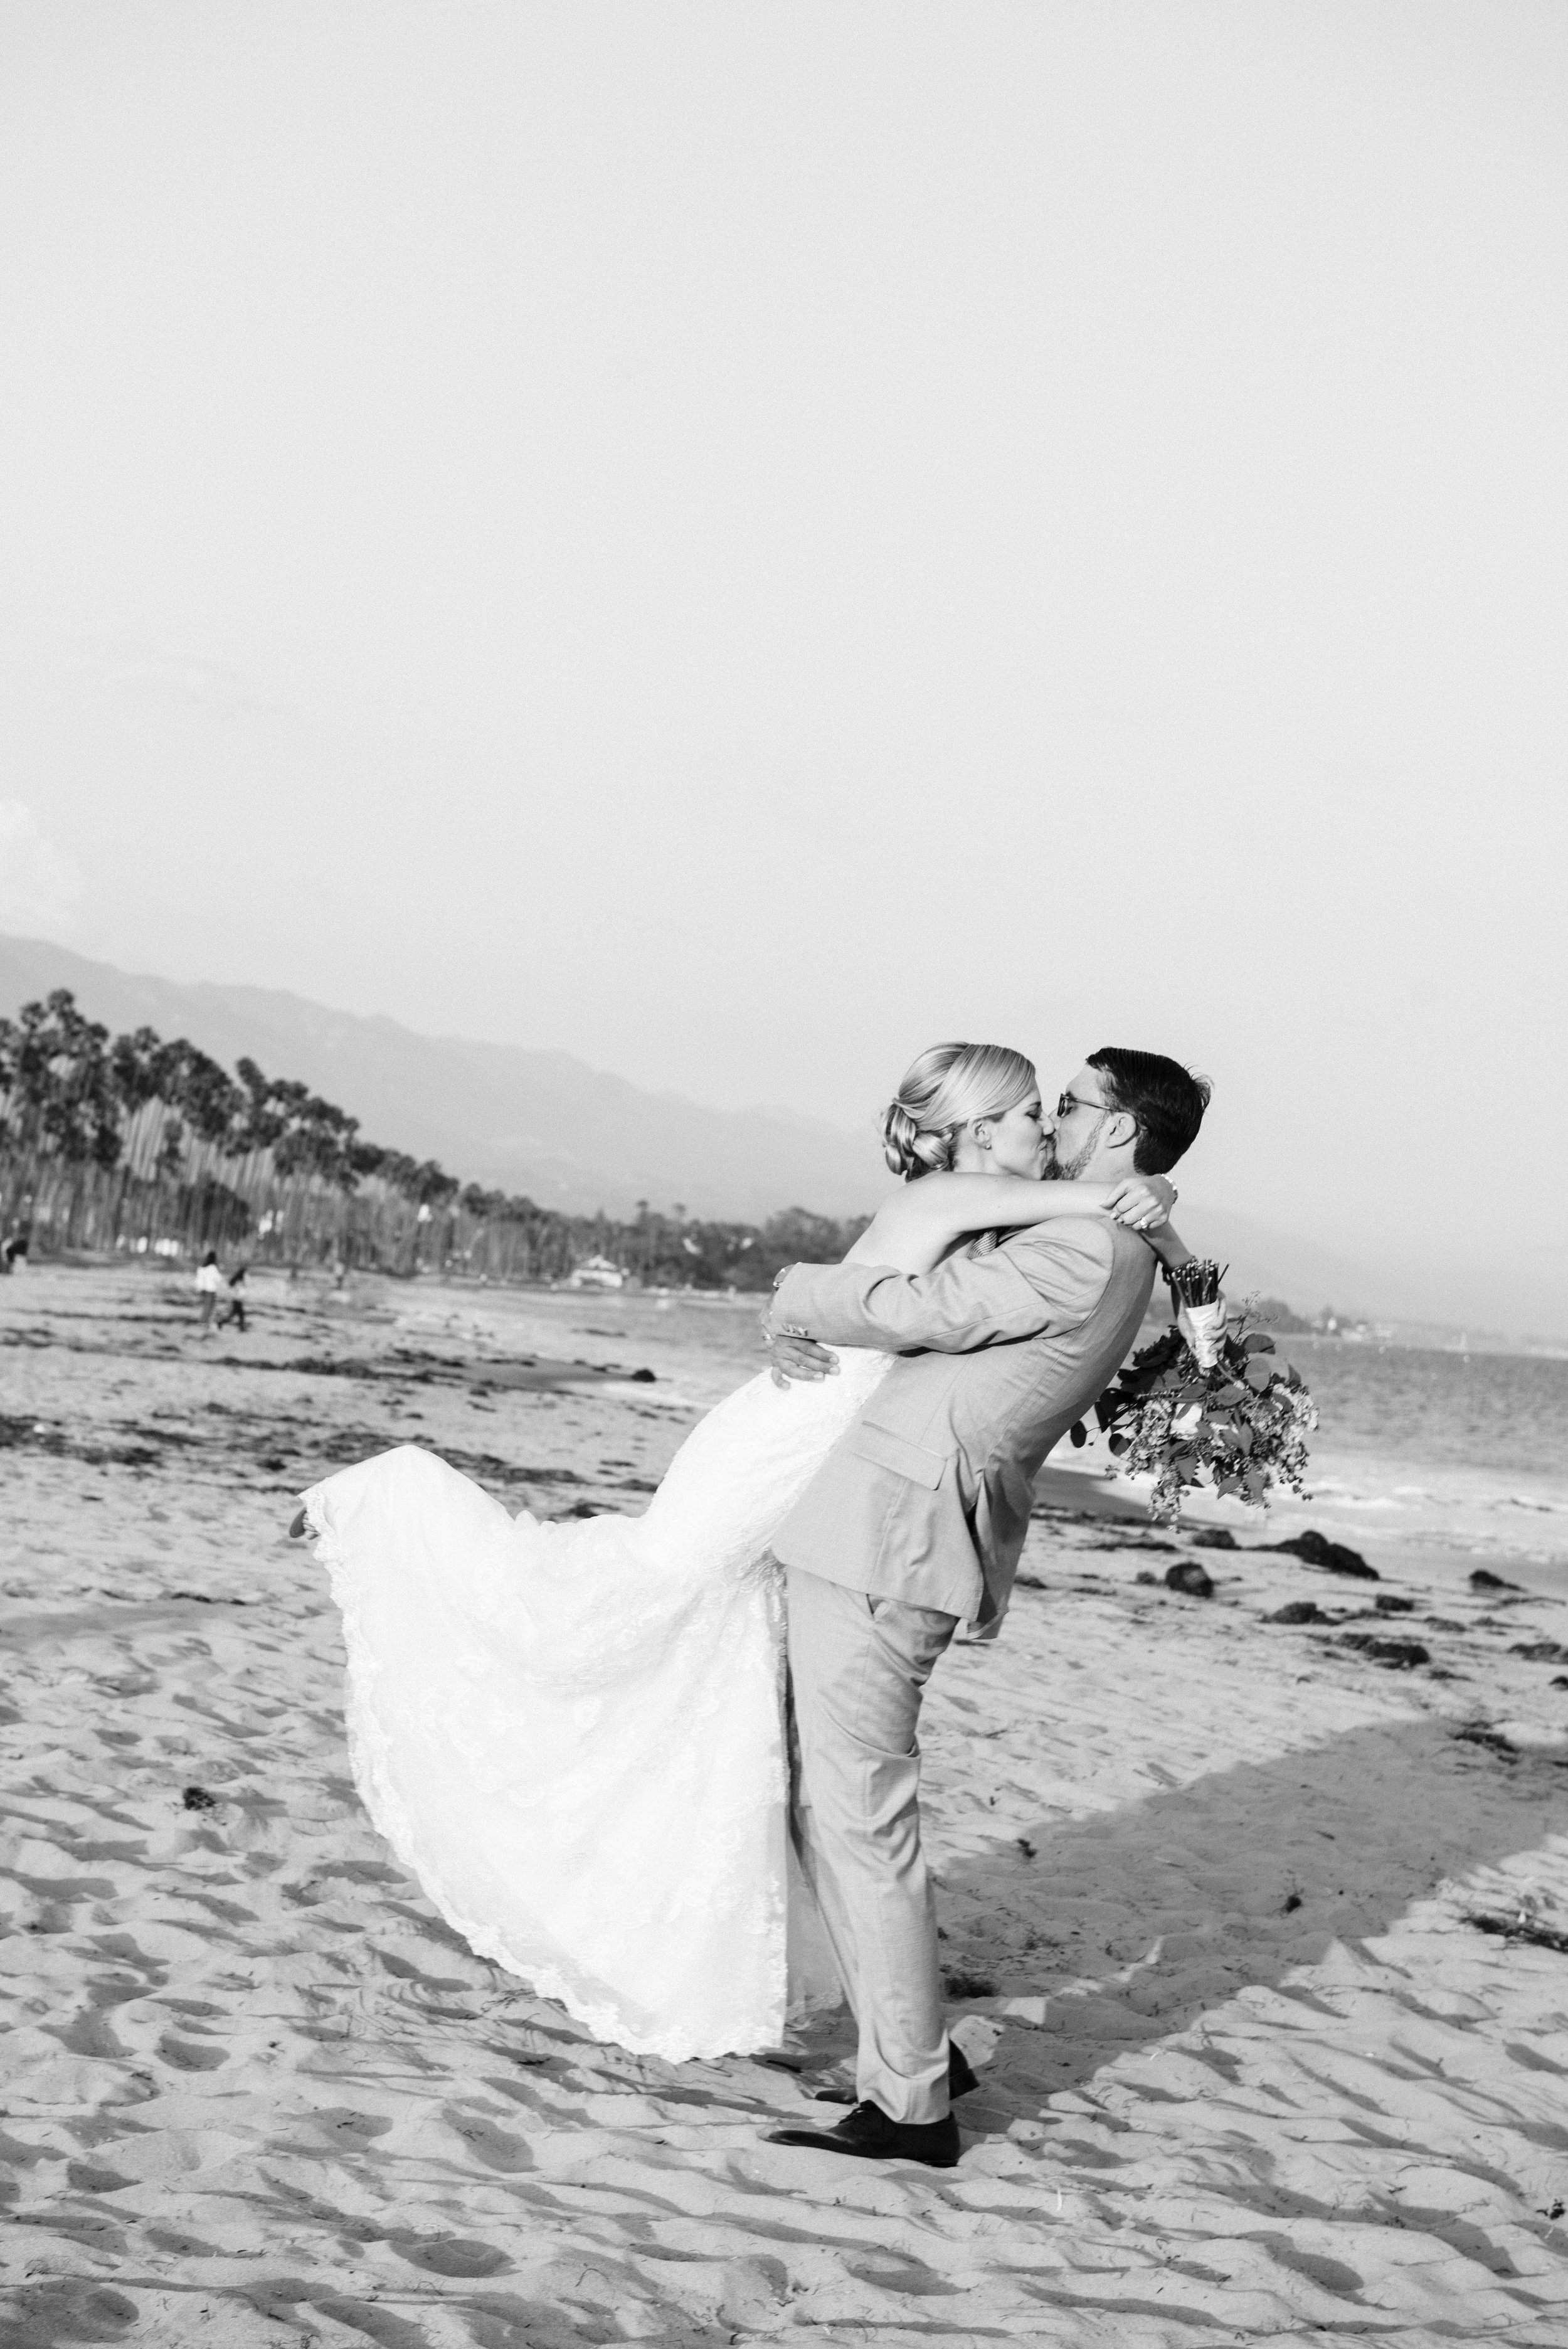 www.santabarbarawedding.com | By Cherry Photography | Chase Palm Park | Bride and Groom | Beach